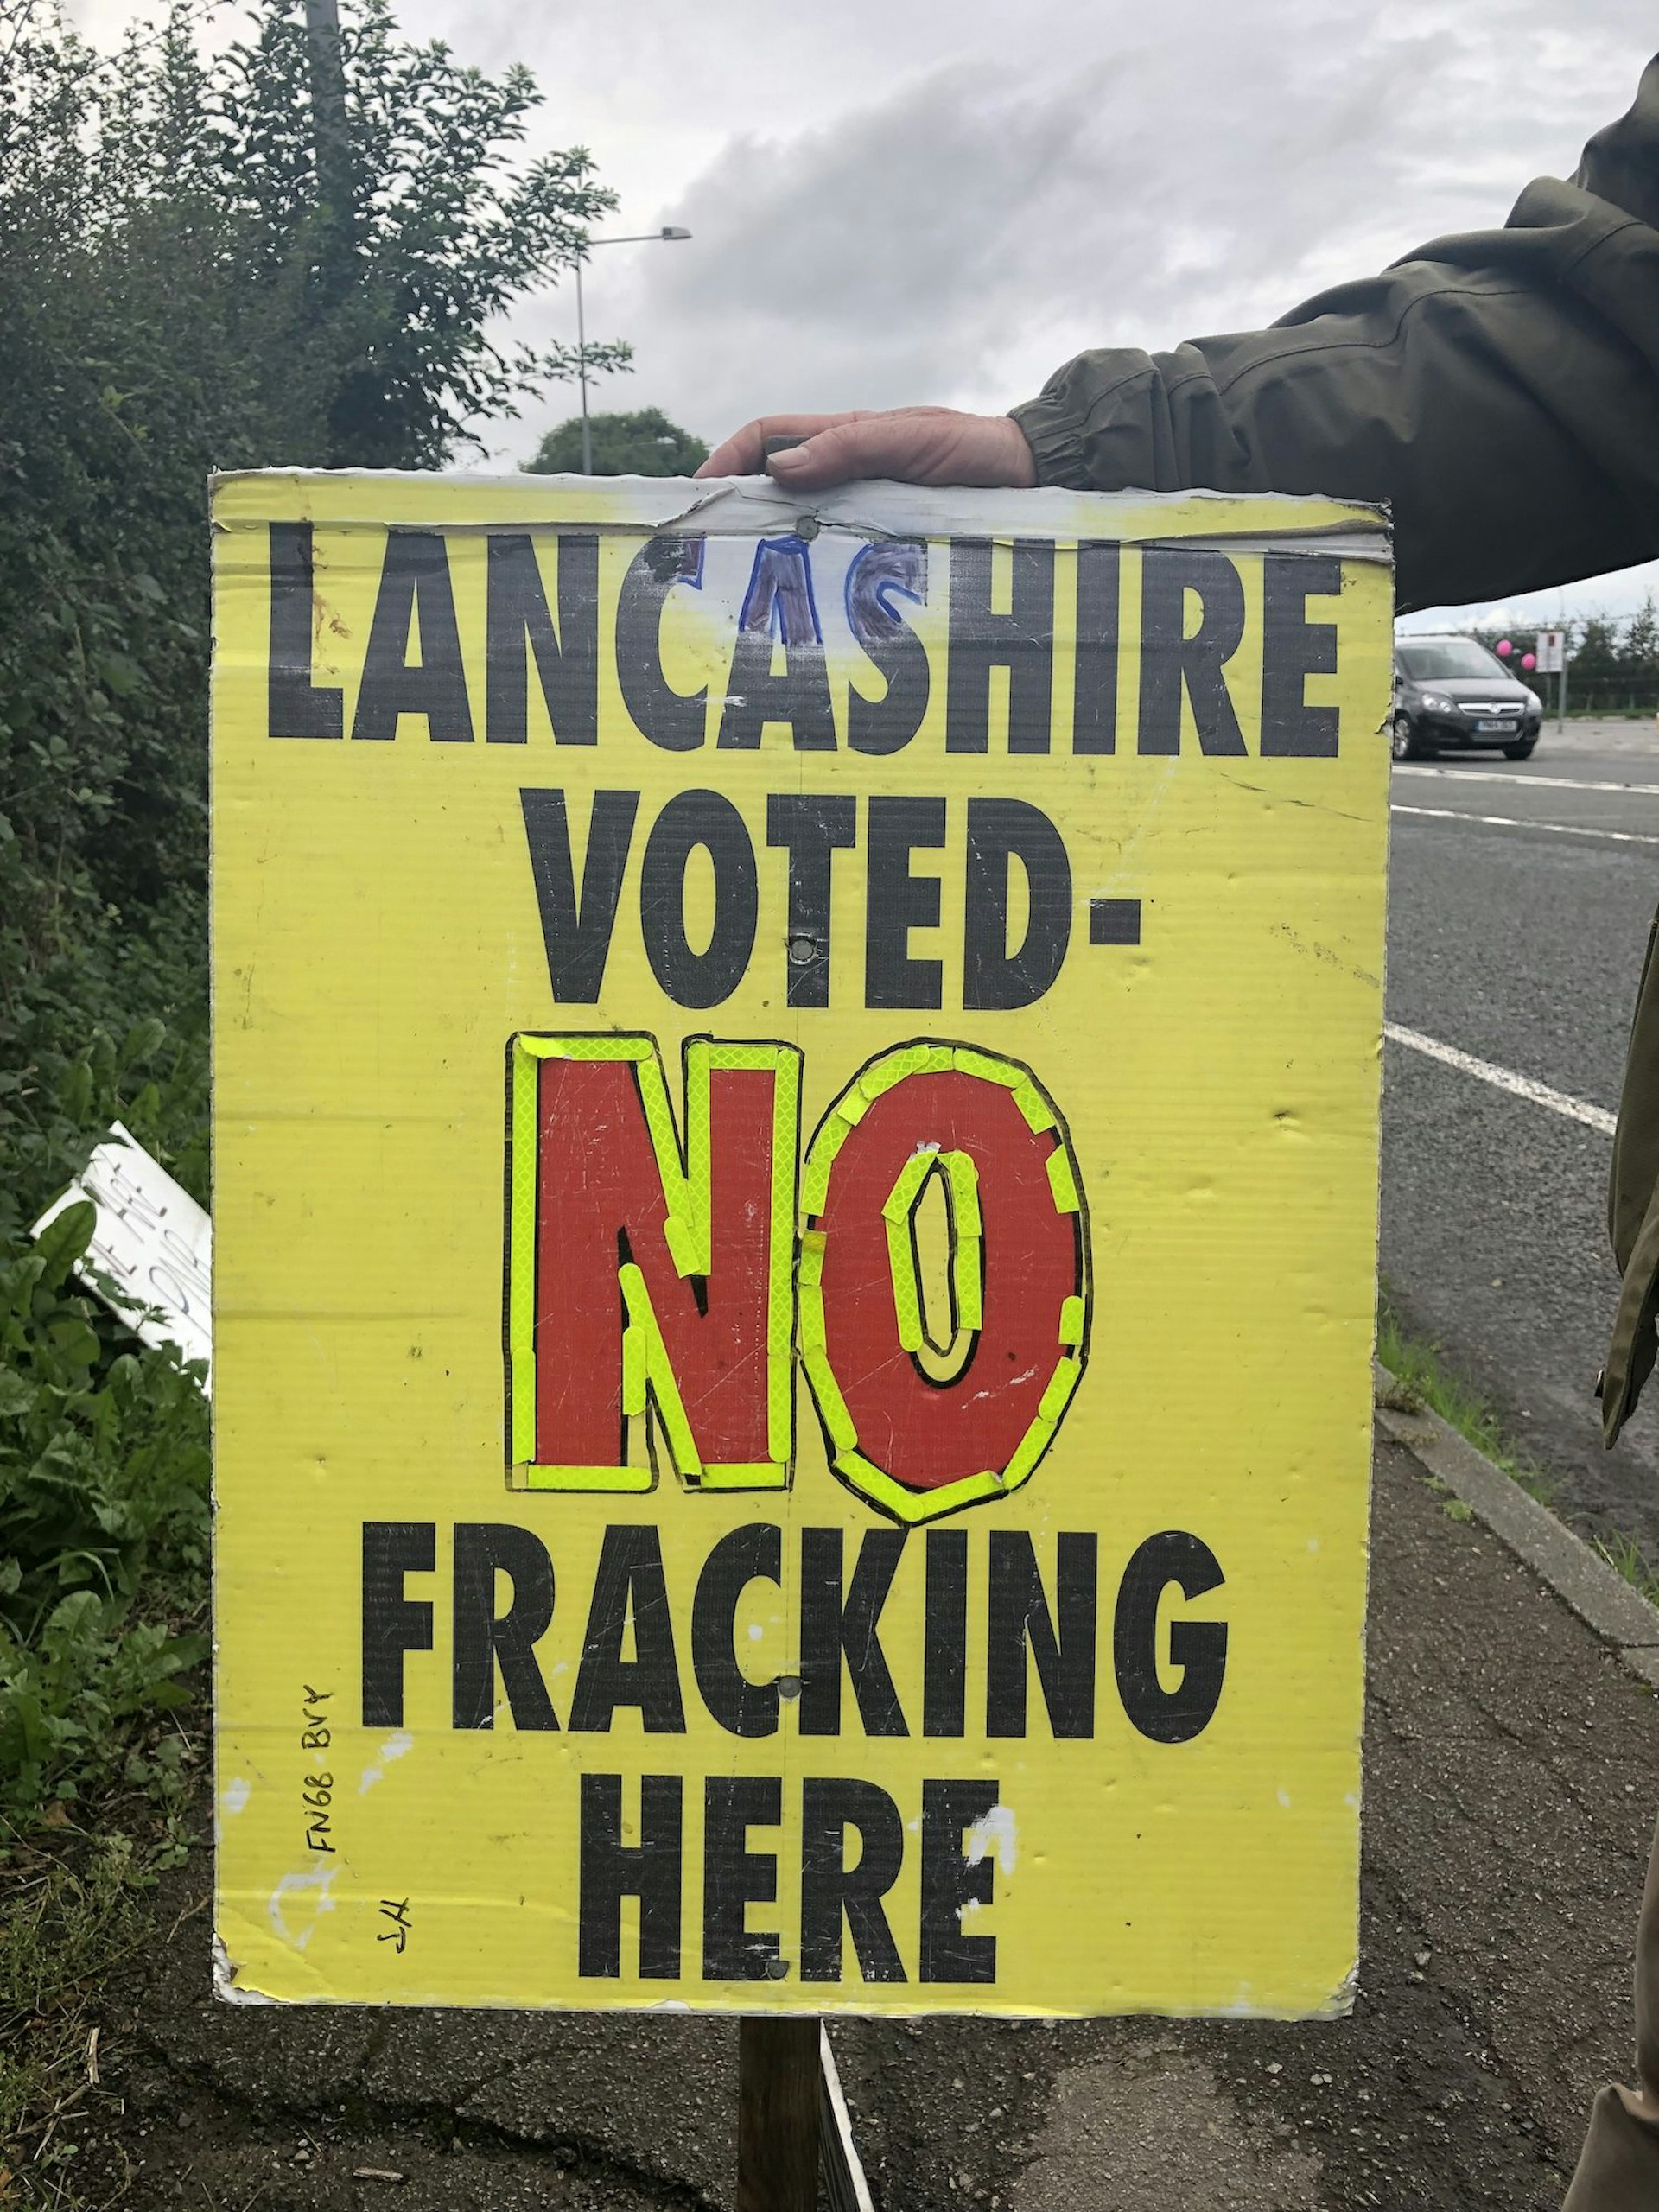 An antifracking protest sign